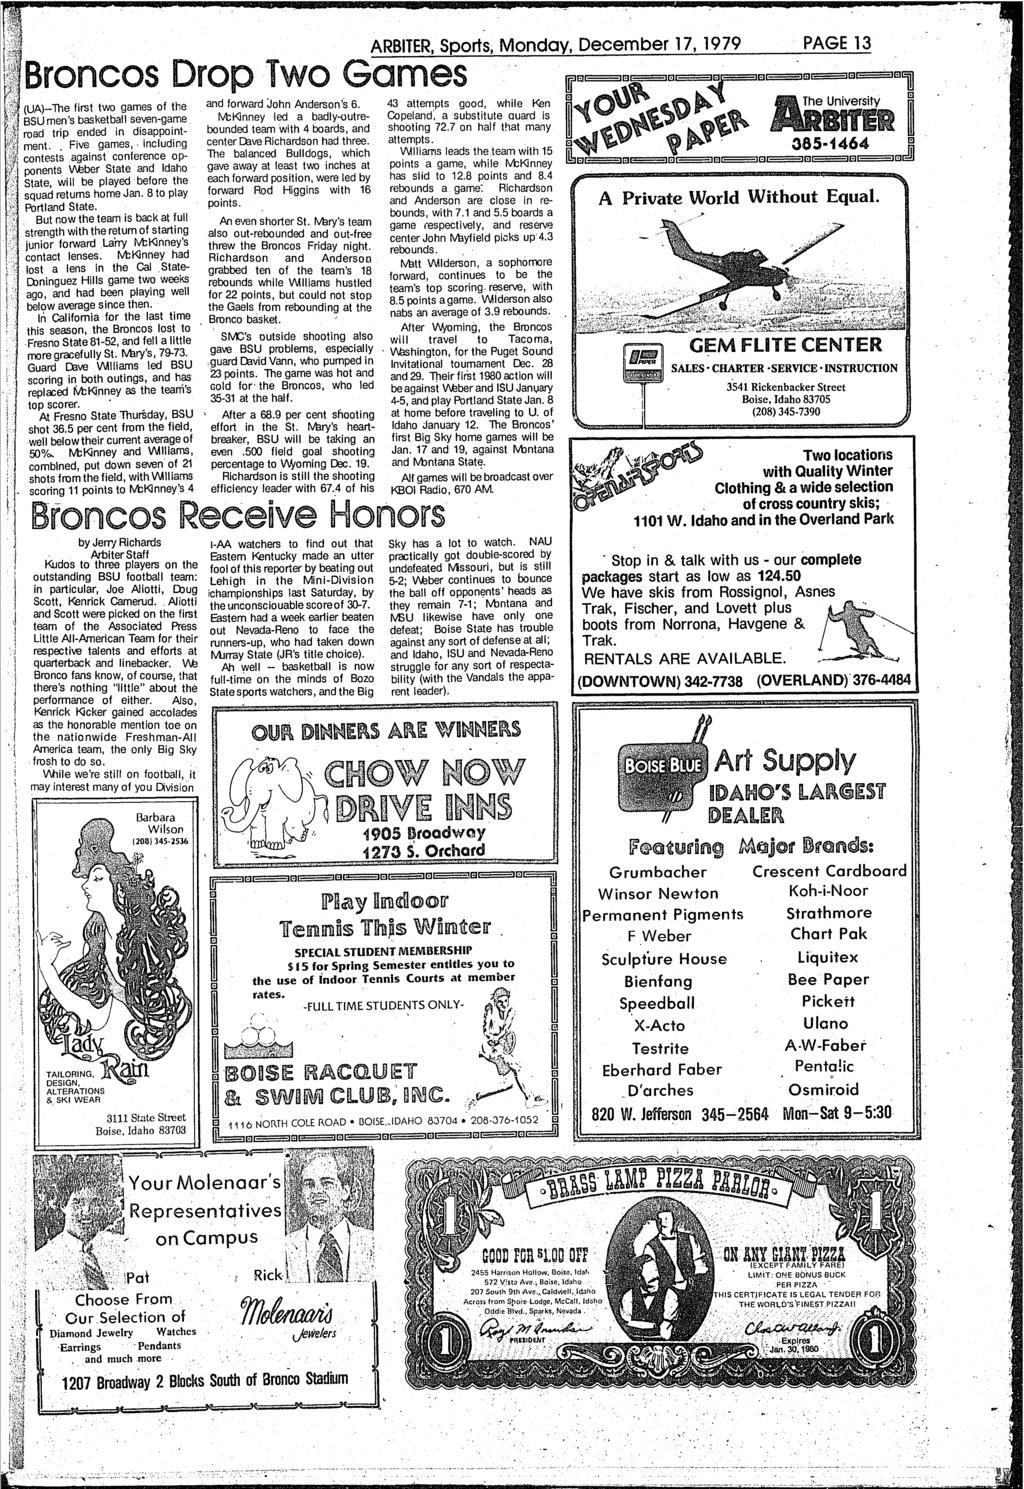 -.._._.._~ _-~.._.."...,.-,-,.,.-,-" ~''':-.,'- - -'..".;.~._.- ARBITER,sports, Monday, December 17,1979 PAGE 13 Broncos Drop Two Games first two games of the and forward John Anderson's 6.